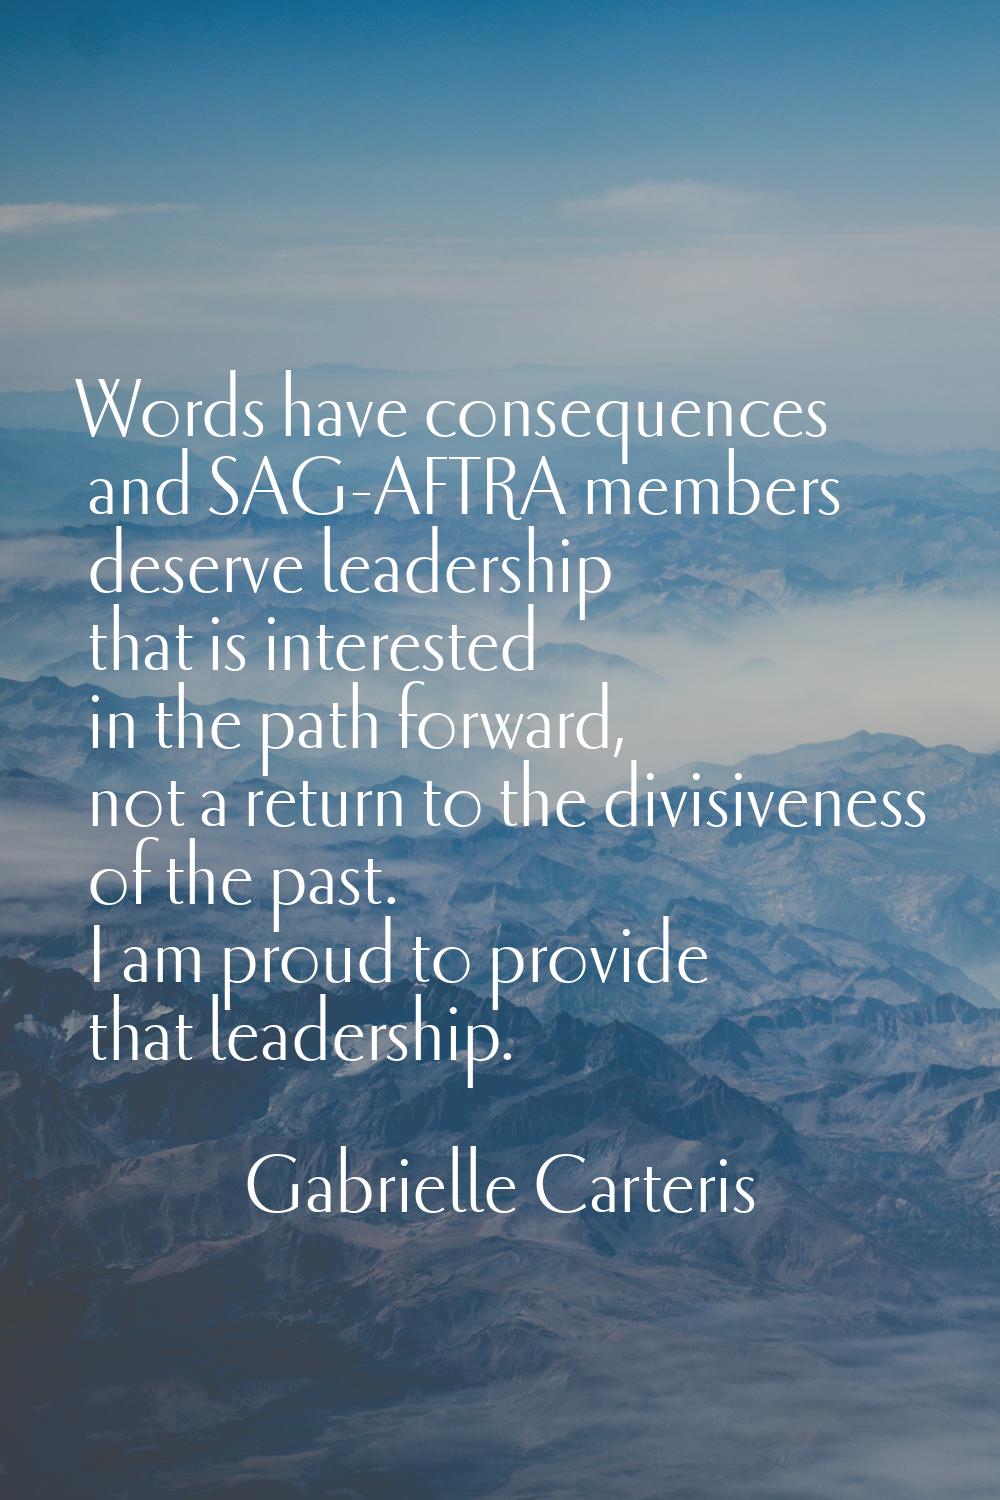 Words have consequences and SAG-AFTRA members deserve leadership that is interested in the path for